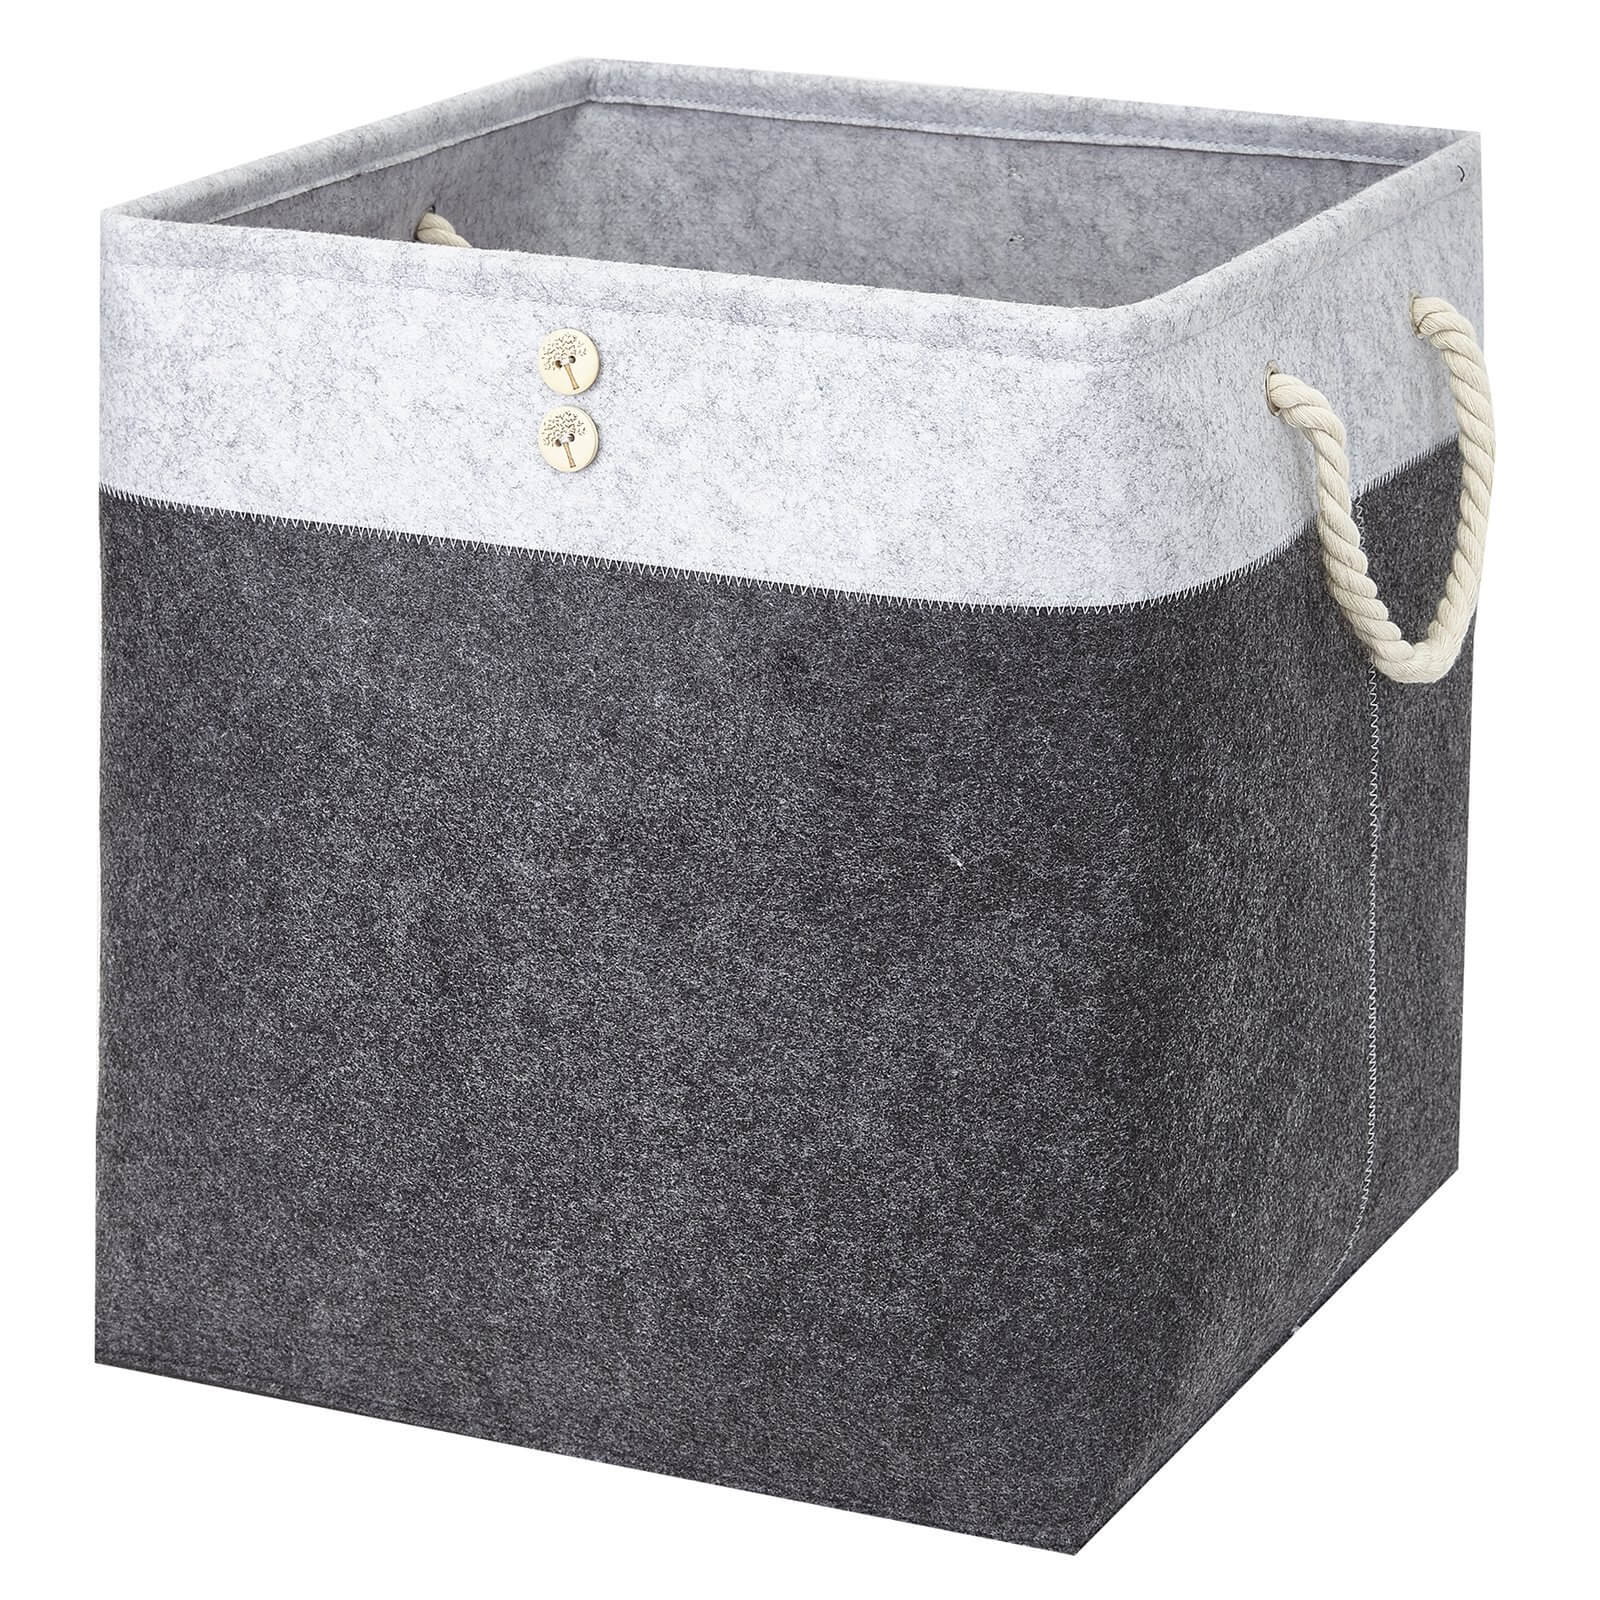 Photo of Felt Storage Box With Buttons